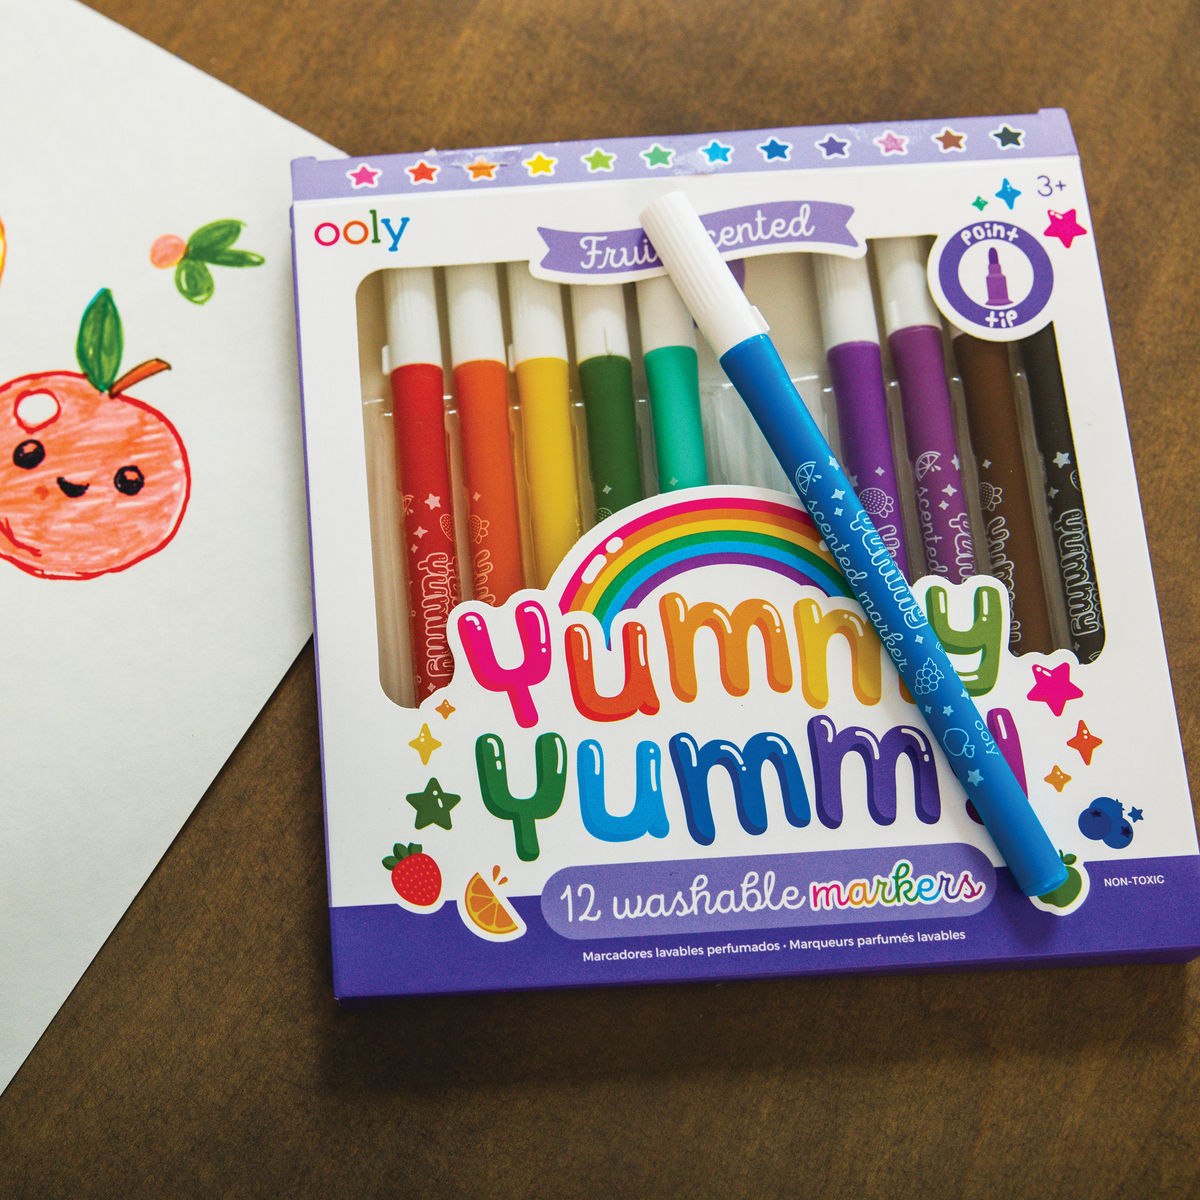 Set of Yummy Yummy scented markers on a wooden table next to cute fruit drawing